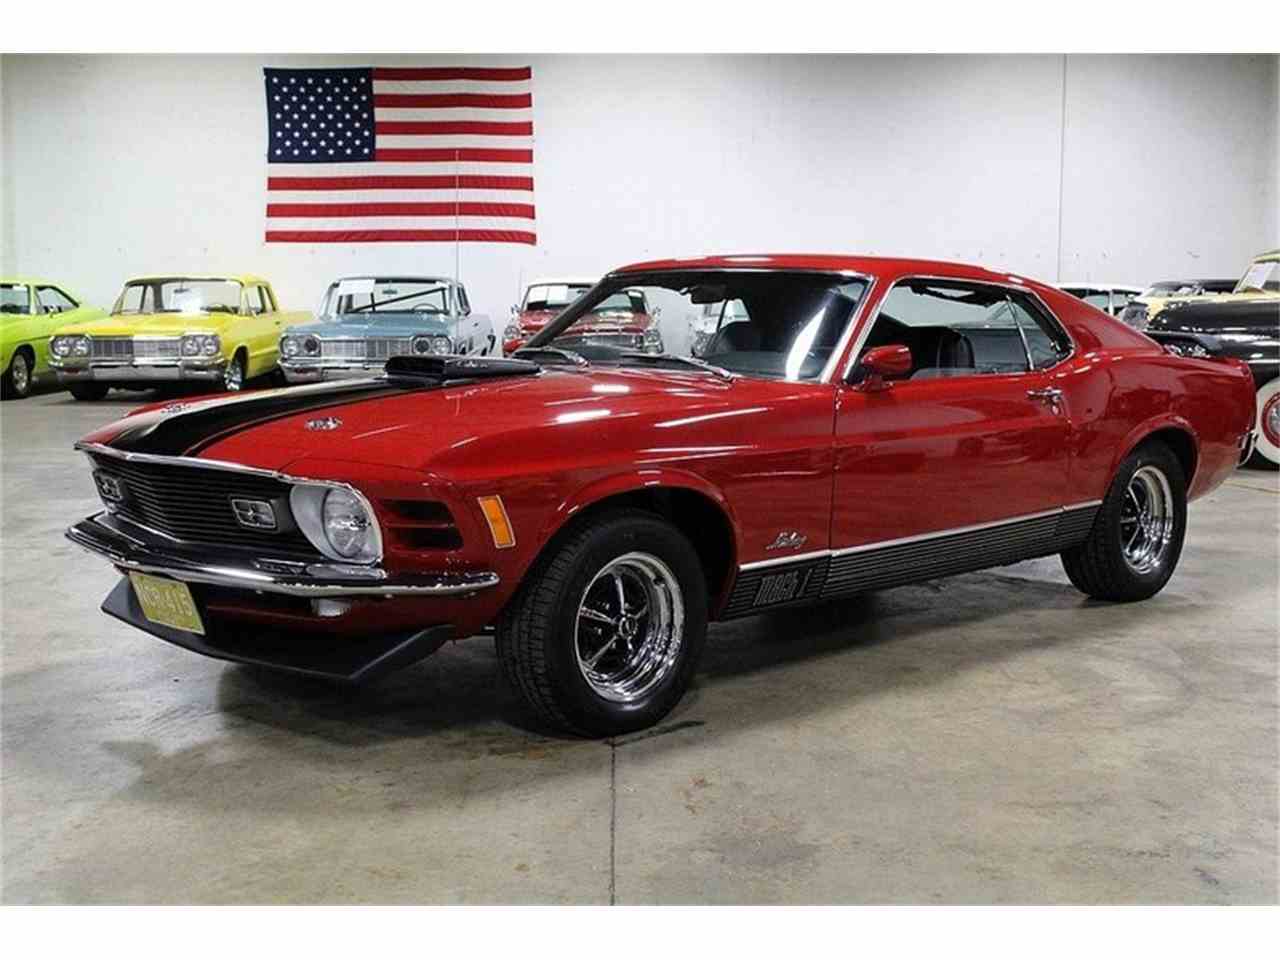 1970 Ford Mustang Mach 1 for Sale | ClassicCars.com | CC-1037623